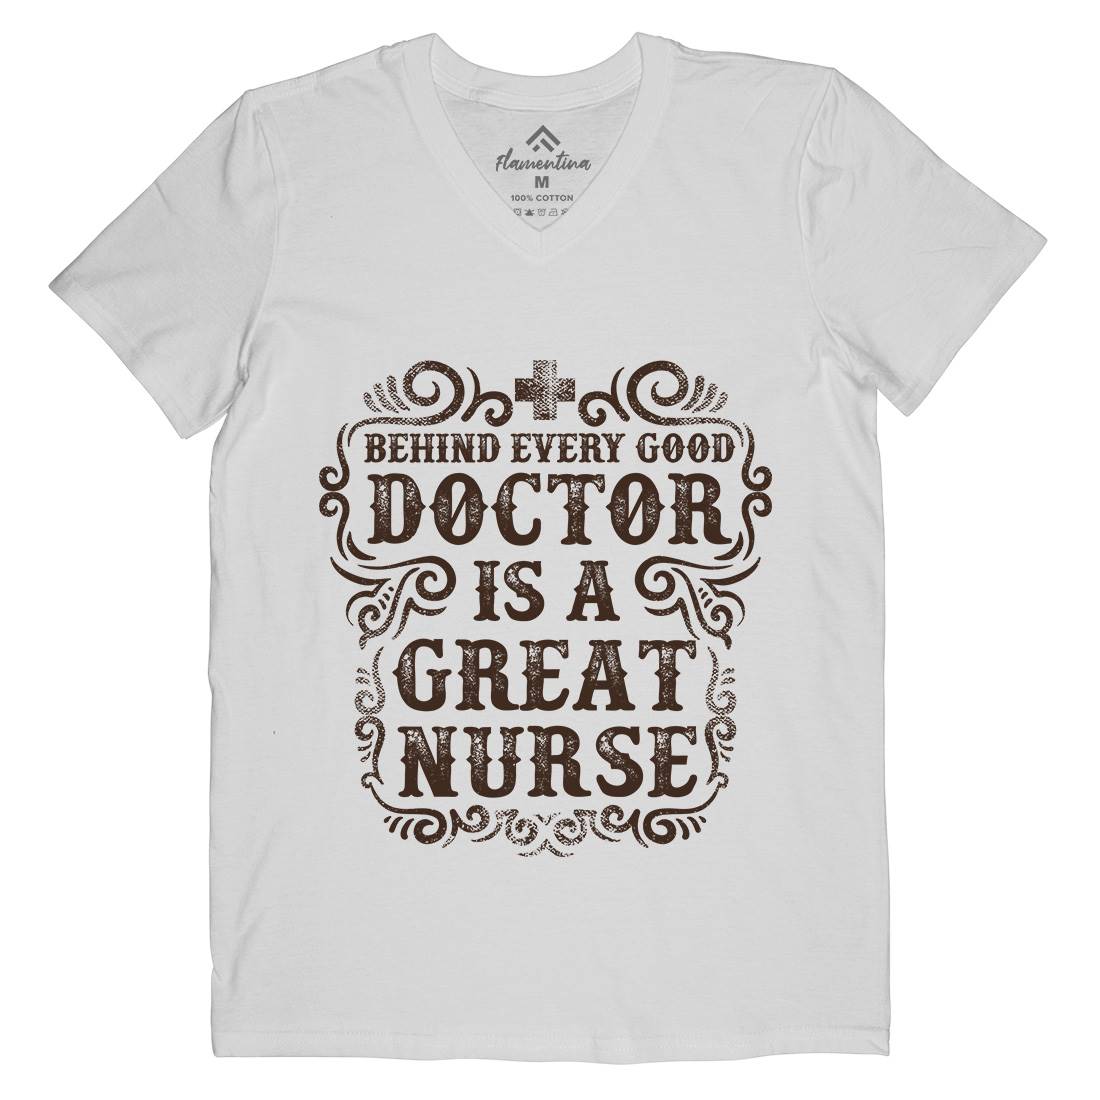 Behind Every Good Doctor Is A Great Nurse Mens Organic V-Neck T-Shirt Work C910